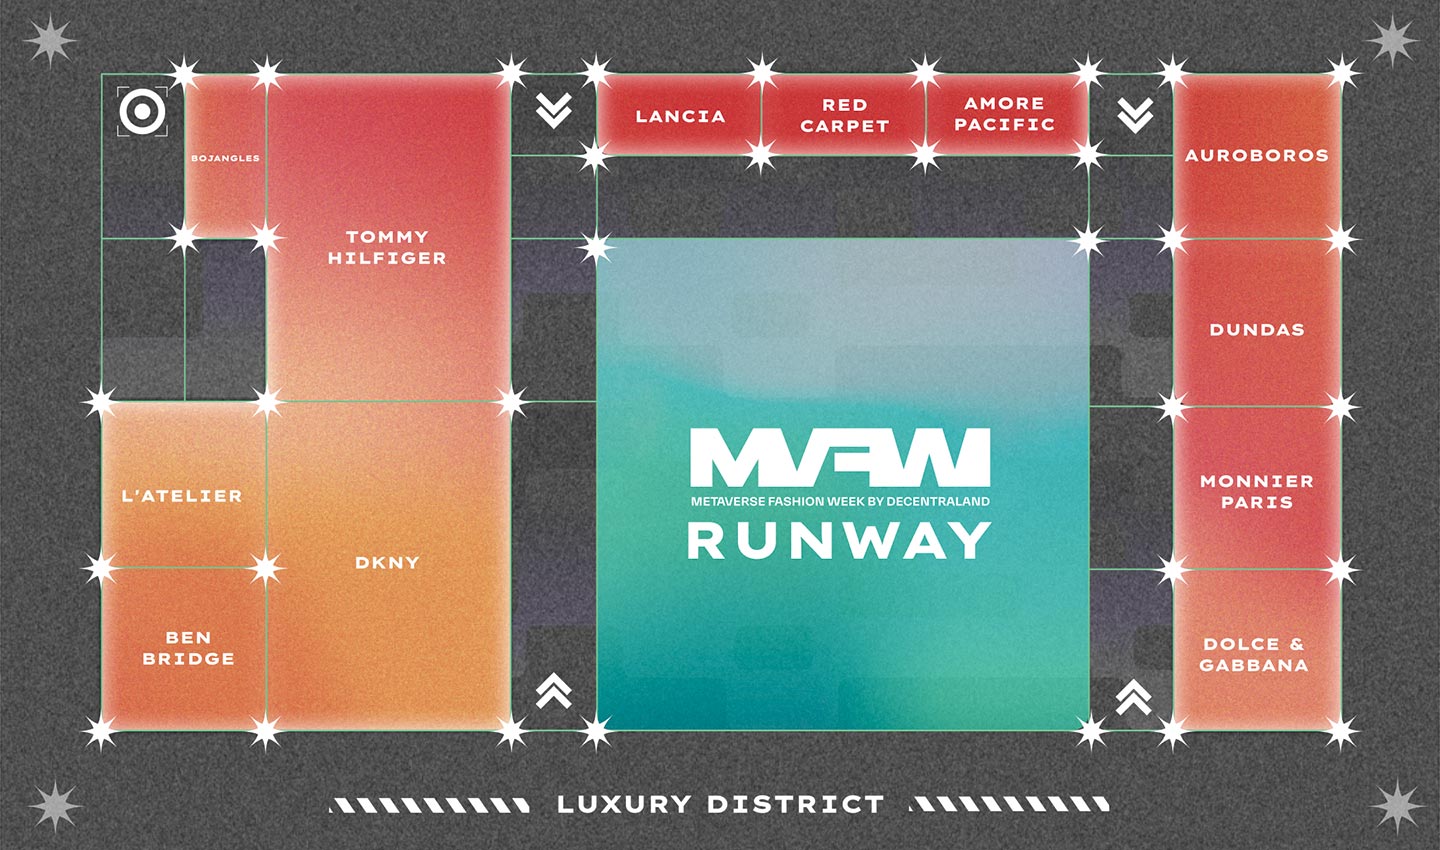 The heart of fashion in Decentraland. The Luxury Fashion District was where global fashion brands displayed their virtual storefronts during MVFW23